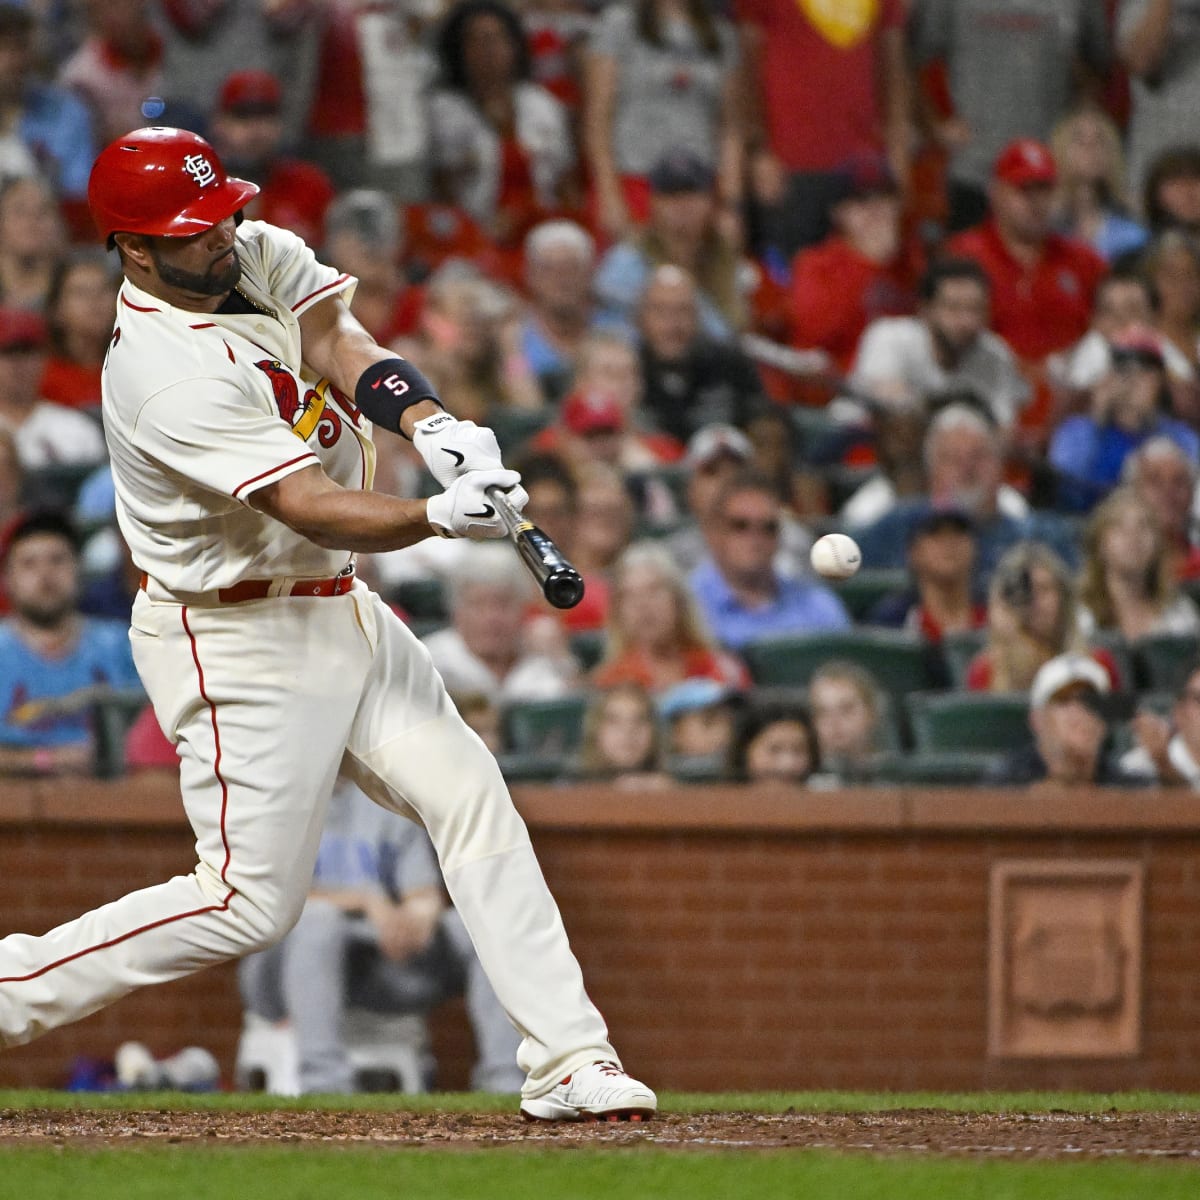 Albert Pujols hits 698th home run in Cardinals' win over Reds